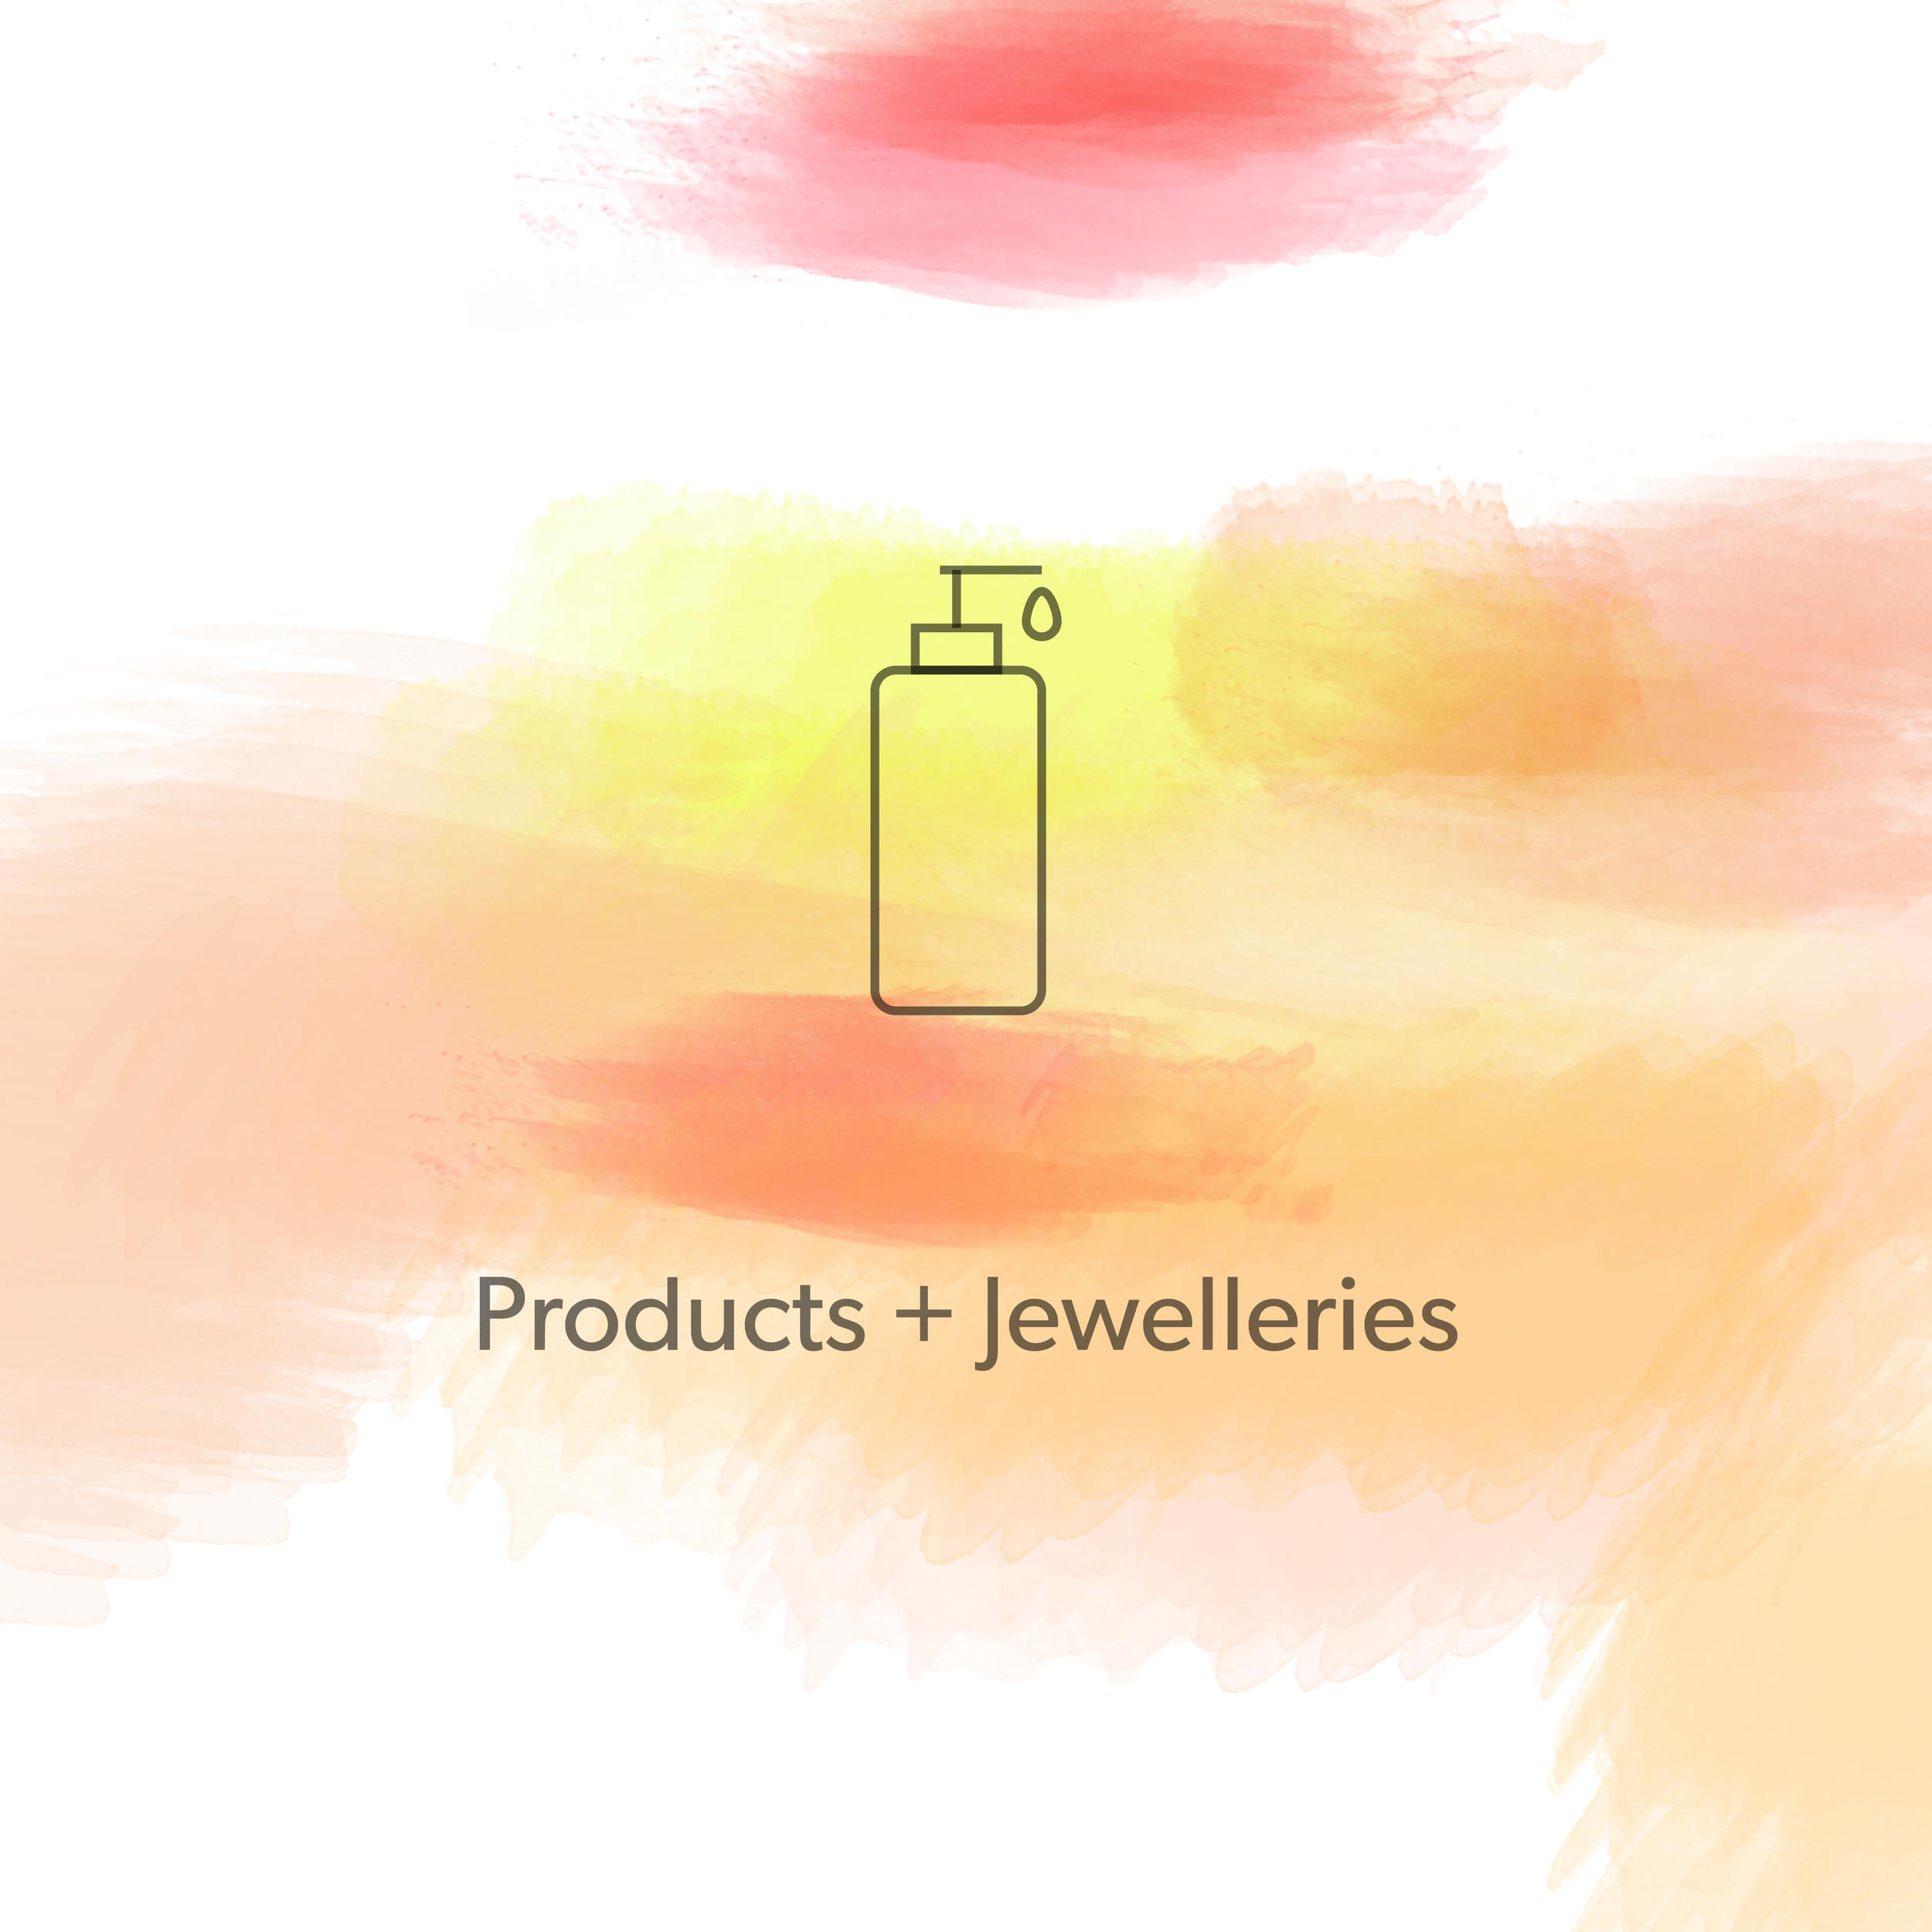 Products and Jewelleries